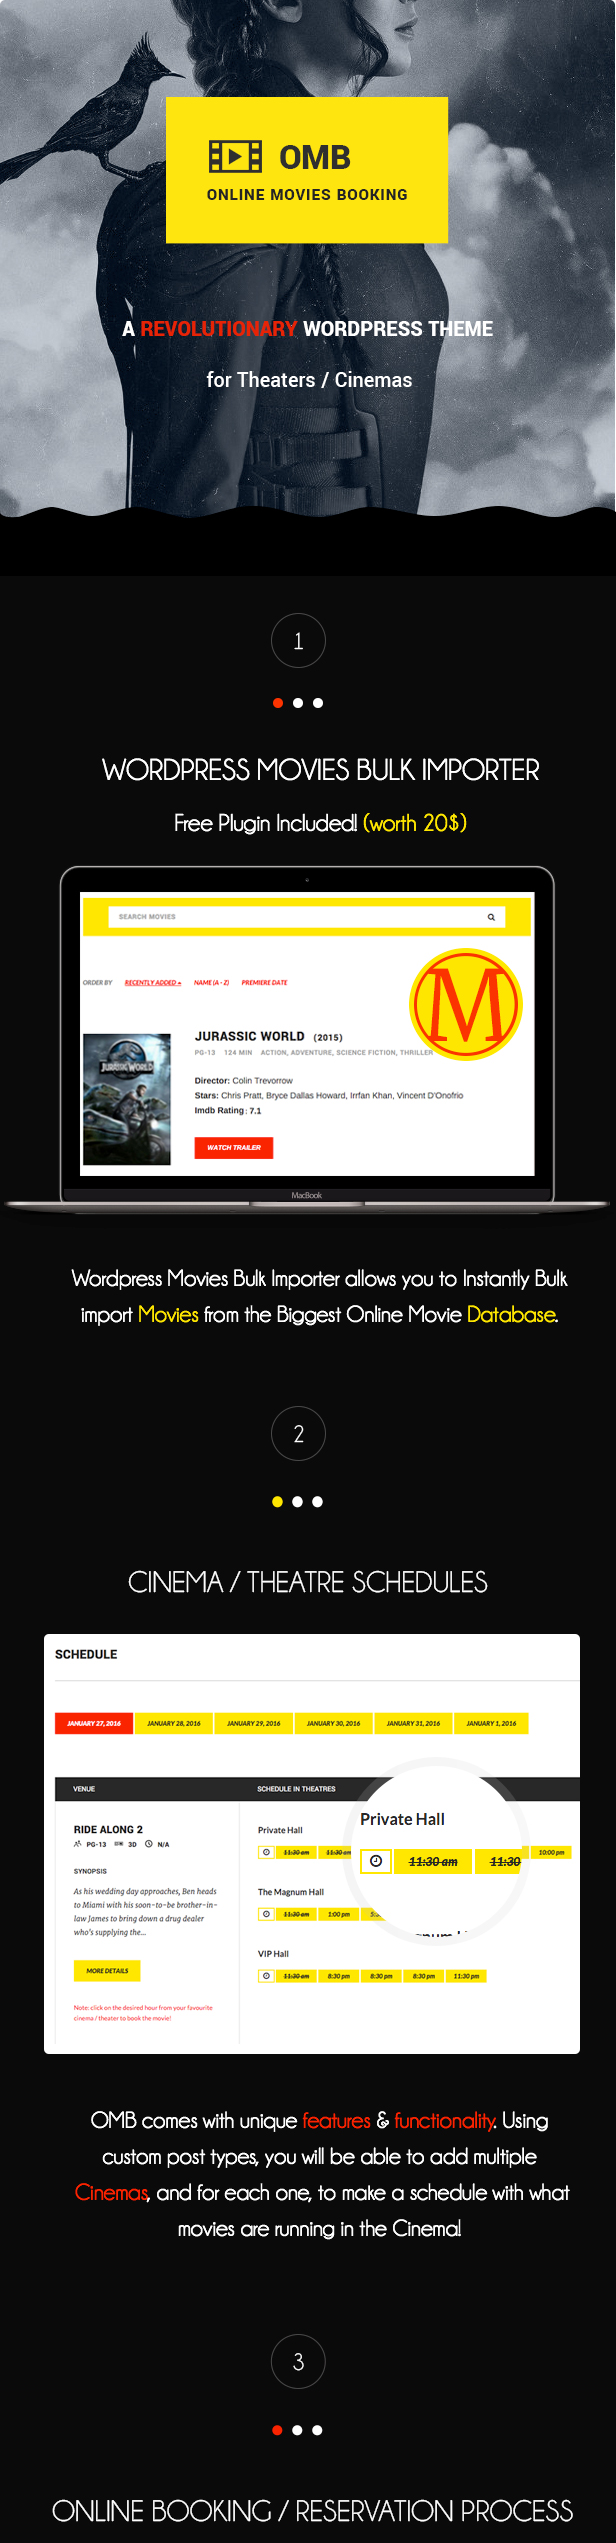 OMB - Online Movies Booking - 3  - omb -